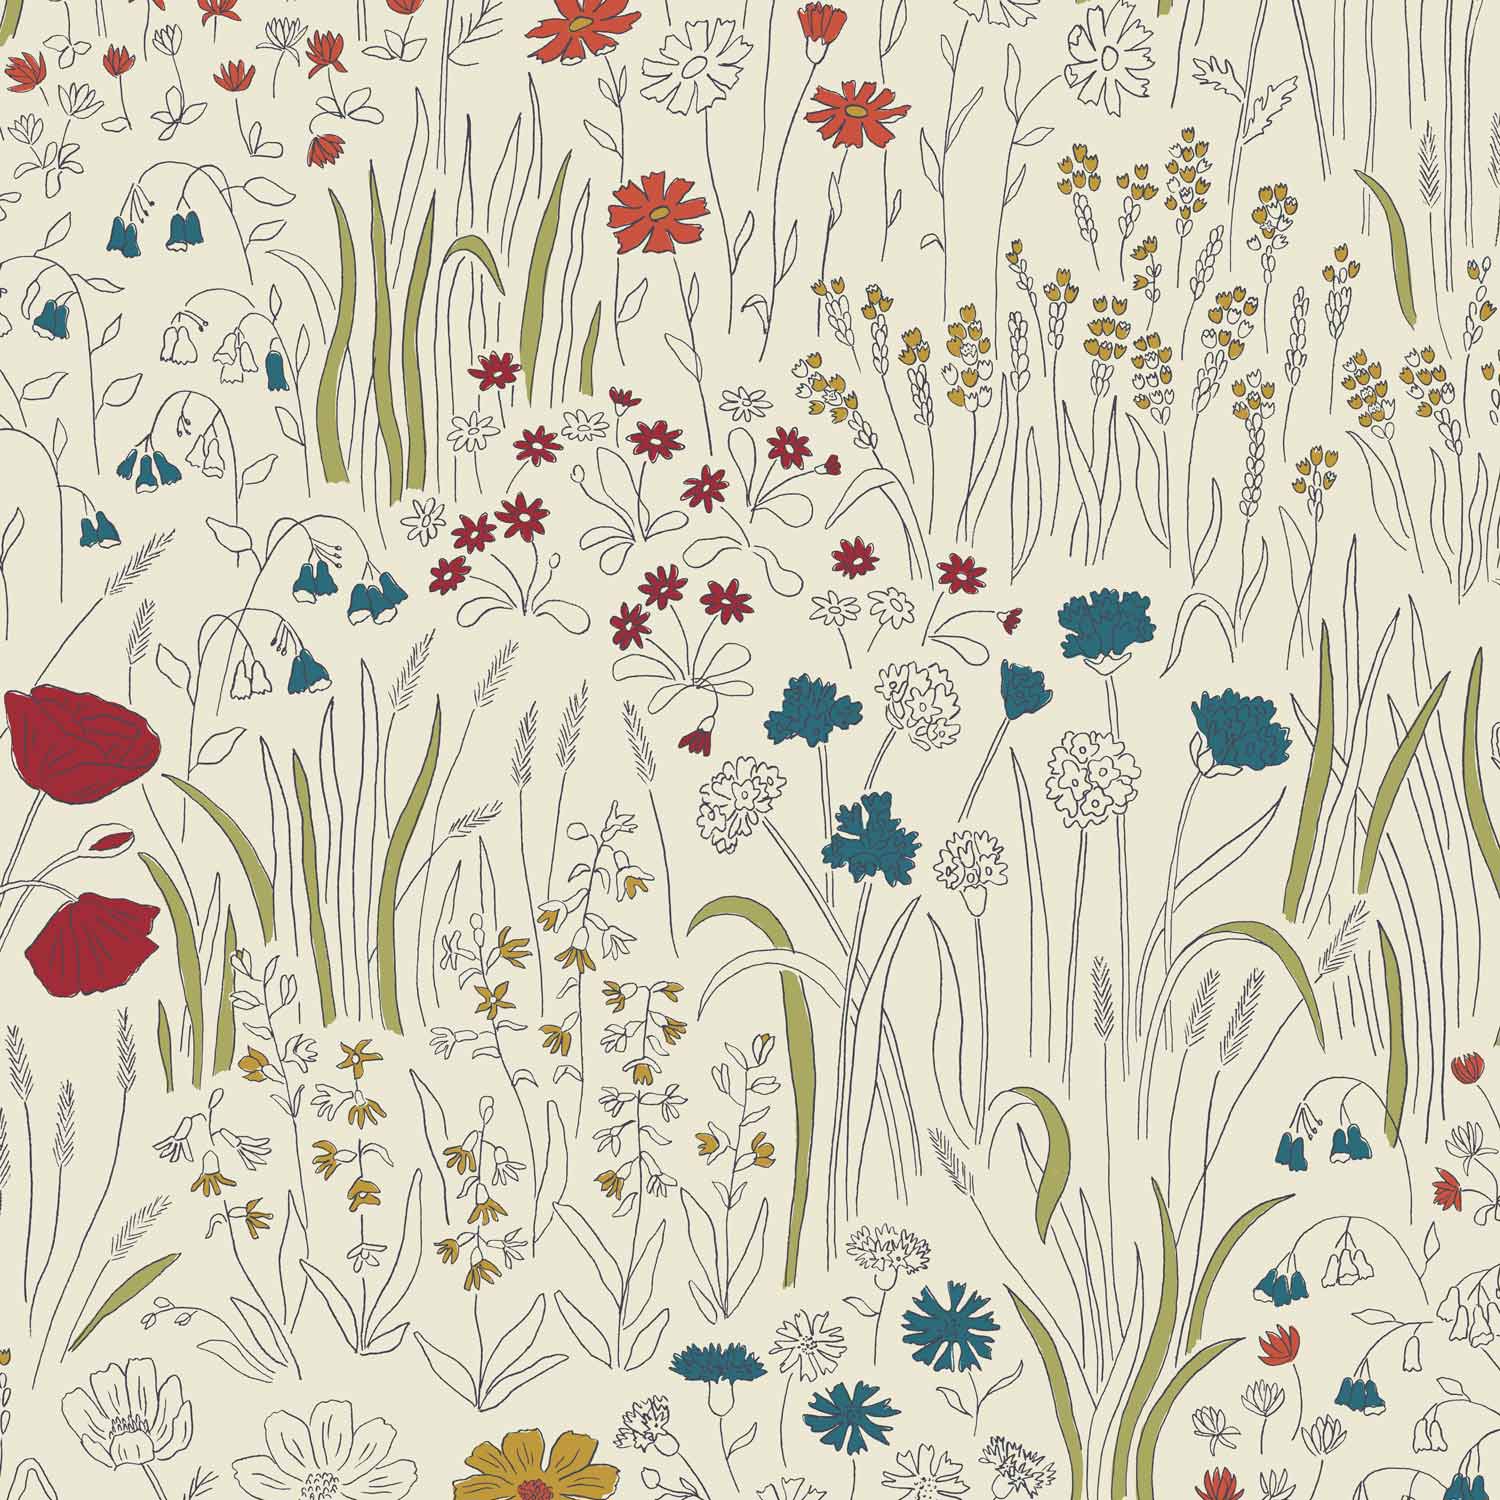 Hygge  West  Sweet Alpine Garden dreams are made of these  Thank you  for sharing kfddesigns we love alpinegardenwallpaper schoolhouse  myhyggeandwest  Facebook